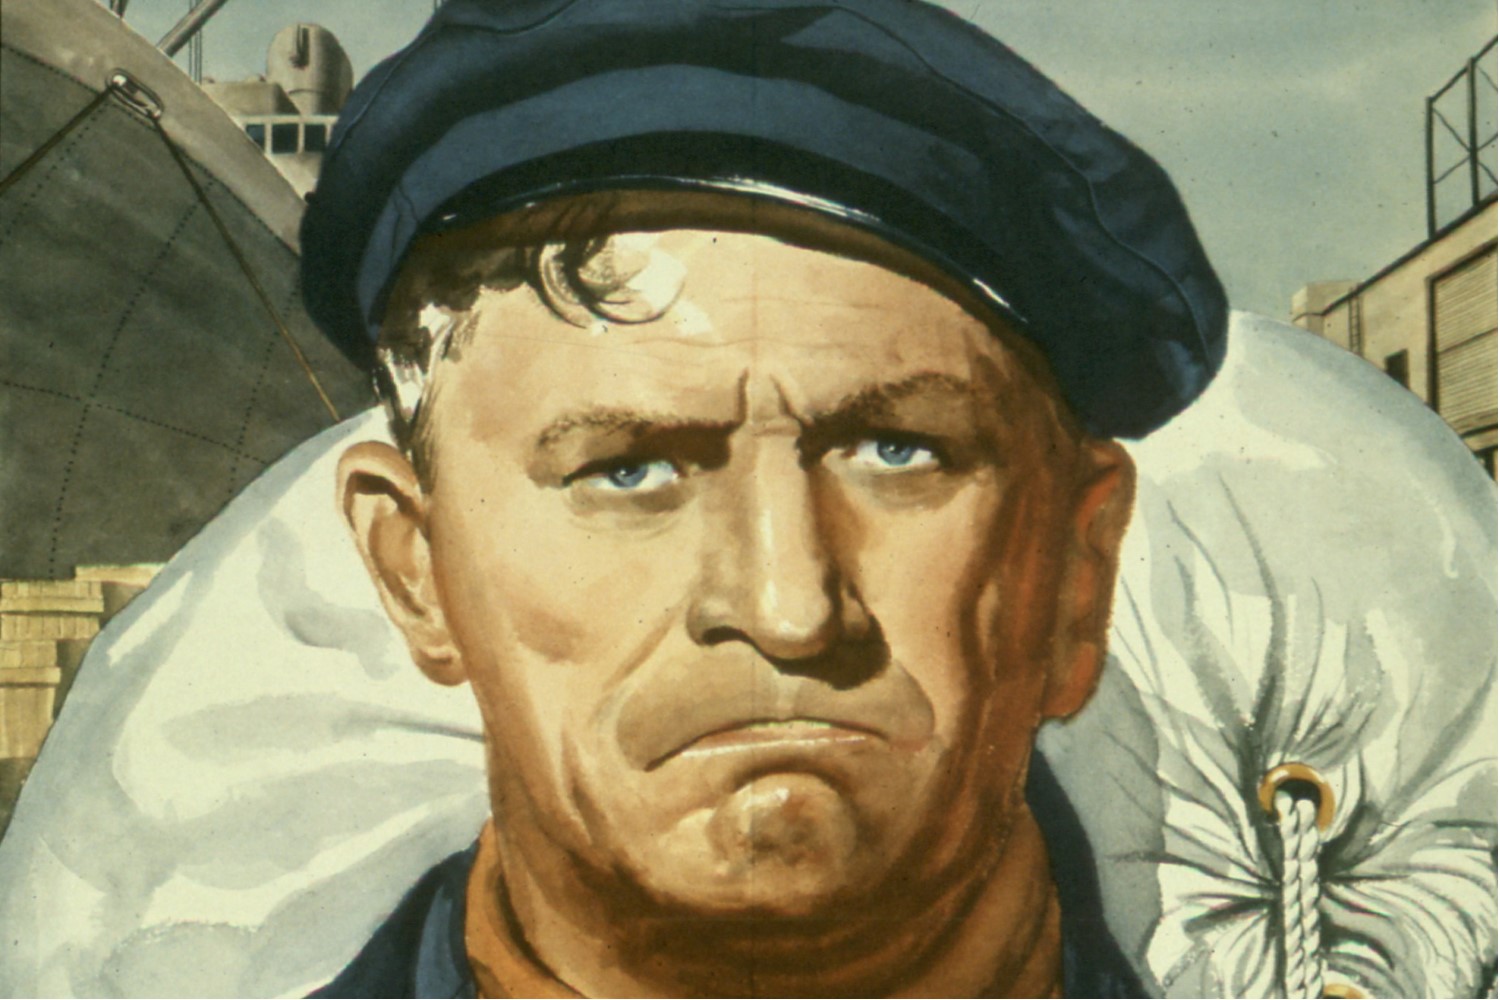 poster of merchant marine from wwII